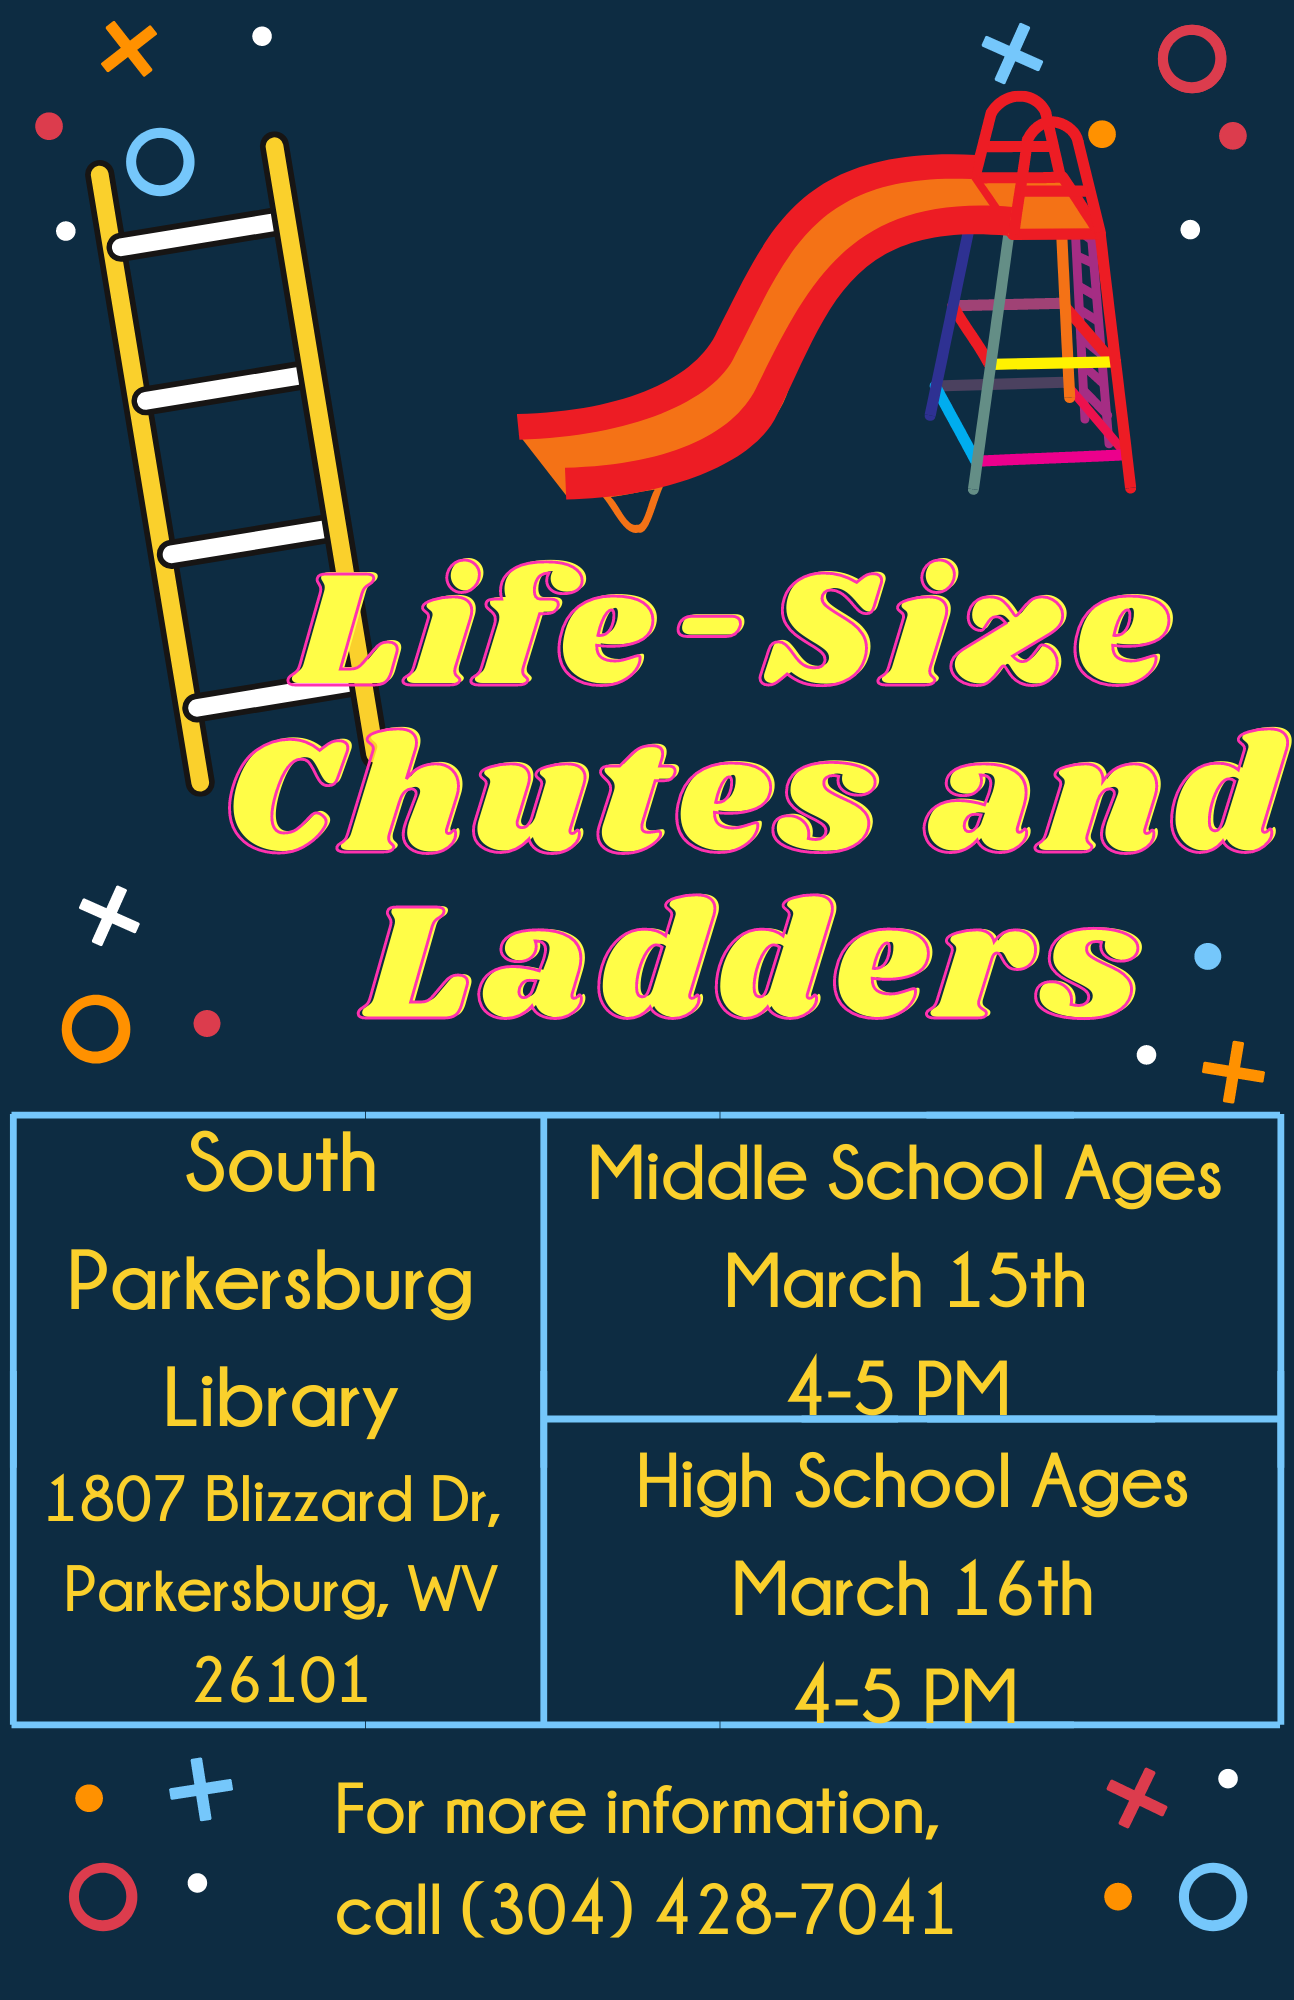 Life-Size Chutes and Ladders at South Parkersburg